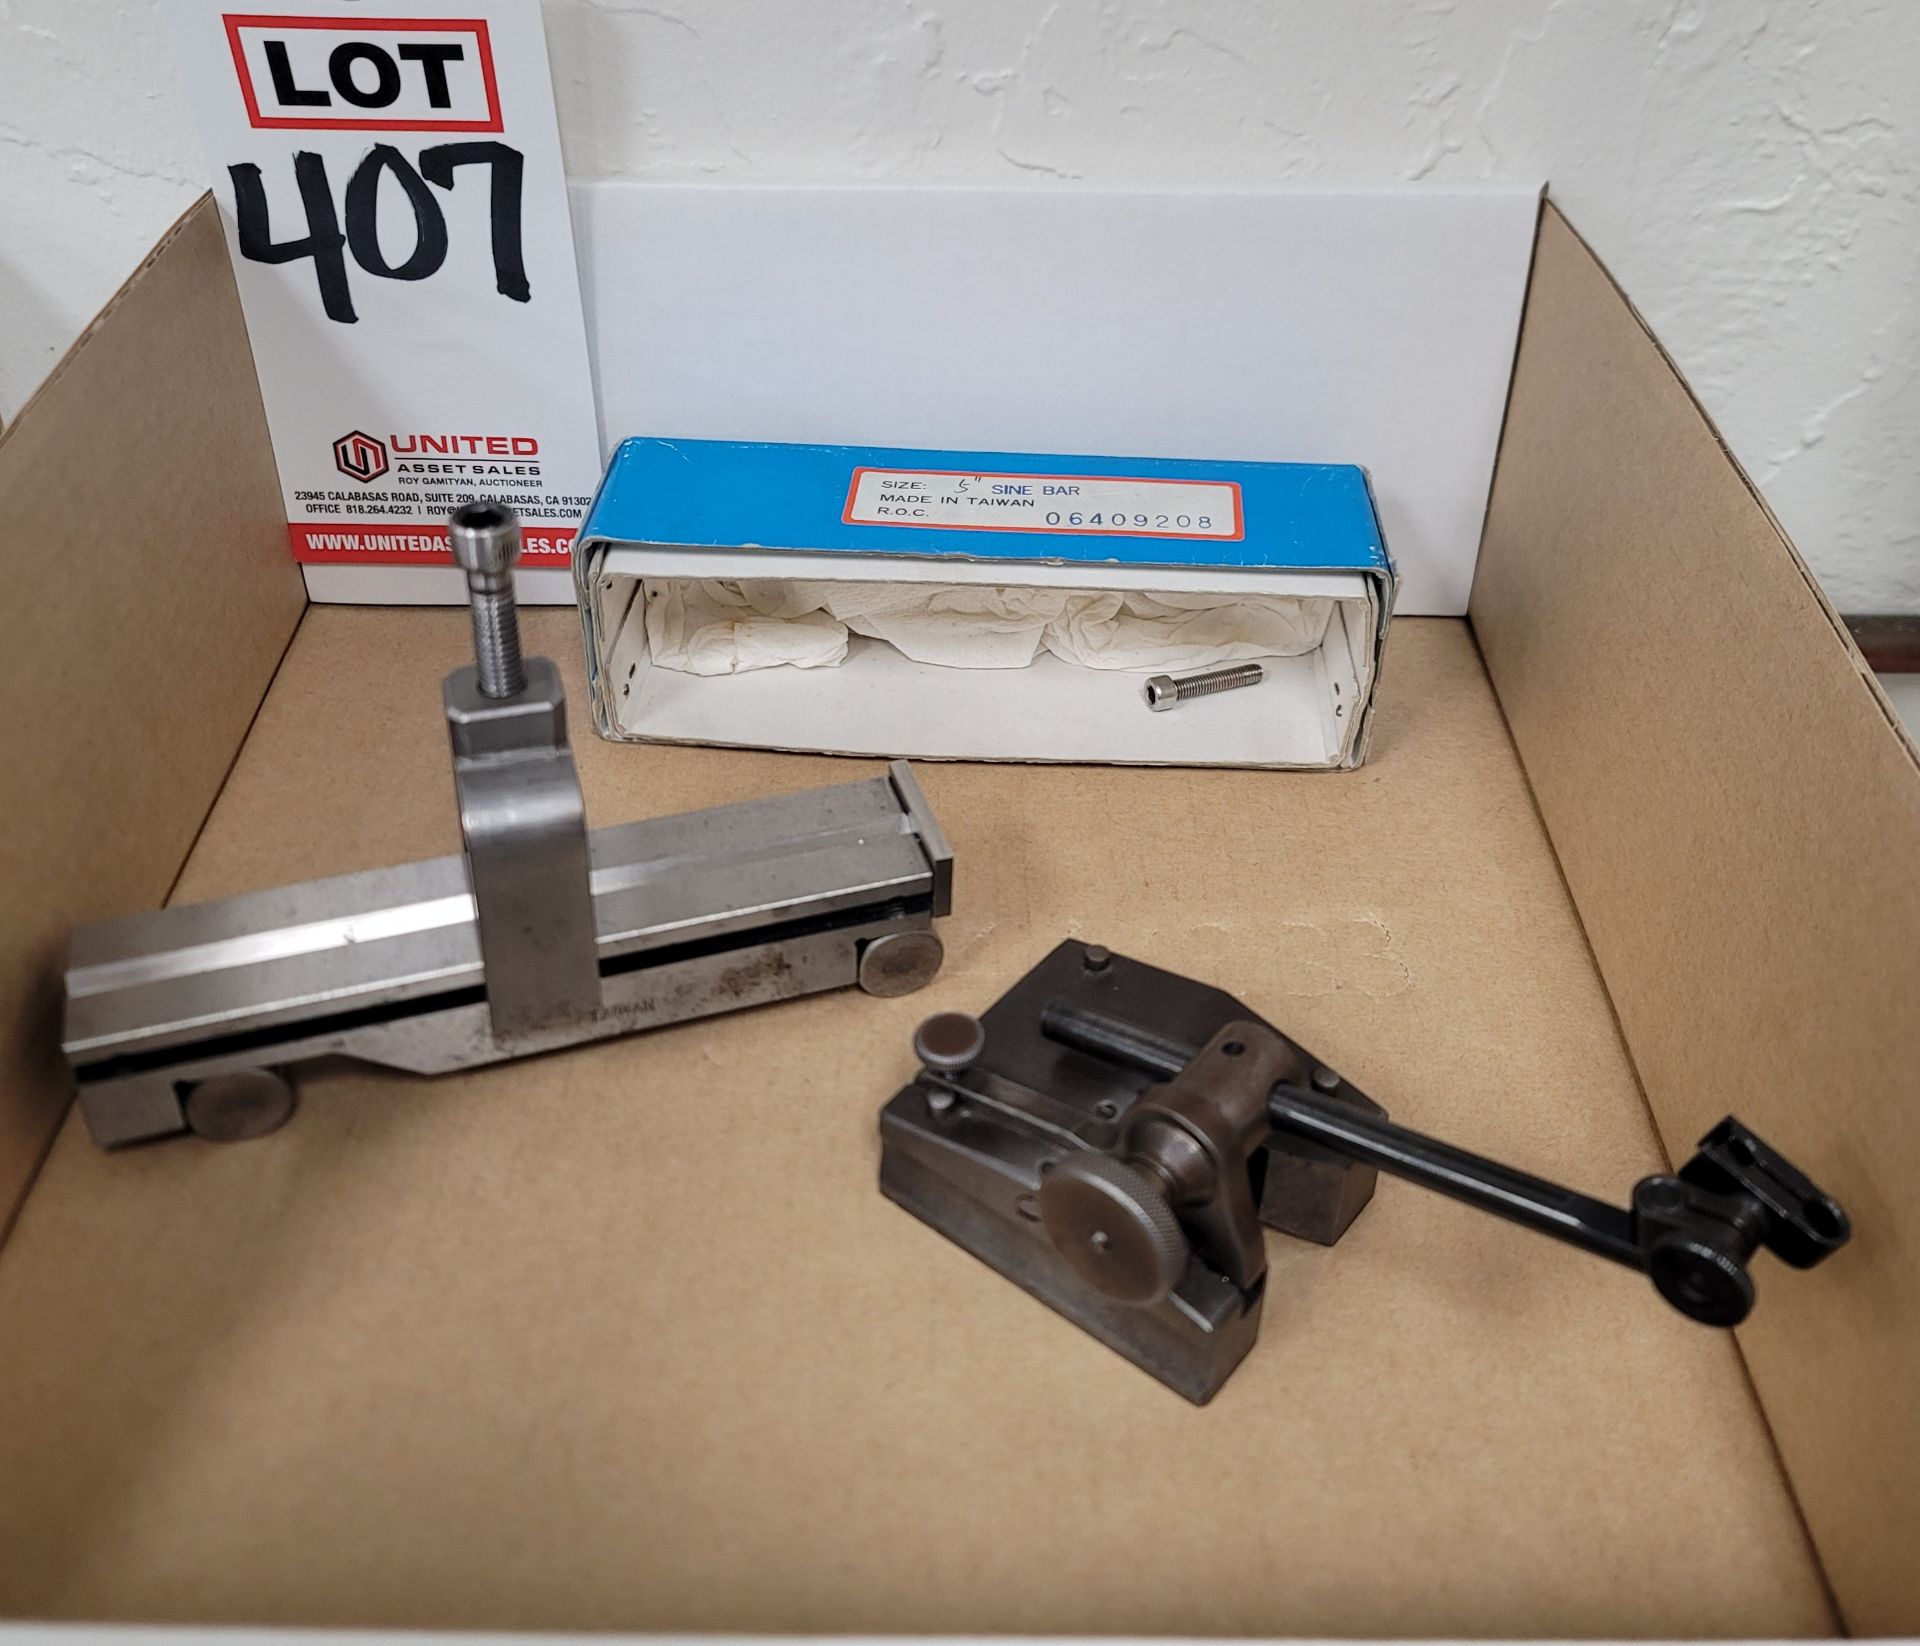 LOT - 5" SINE BAR AND INDICATOR STAND